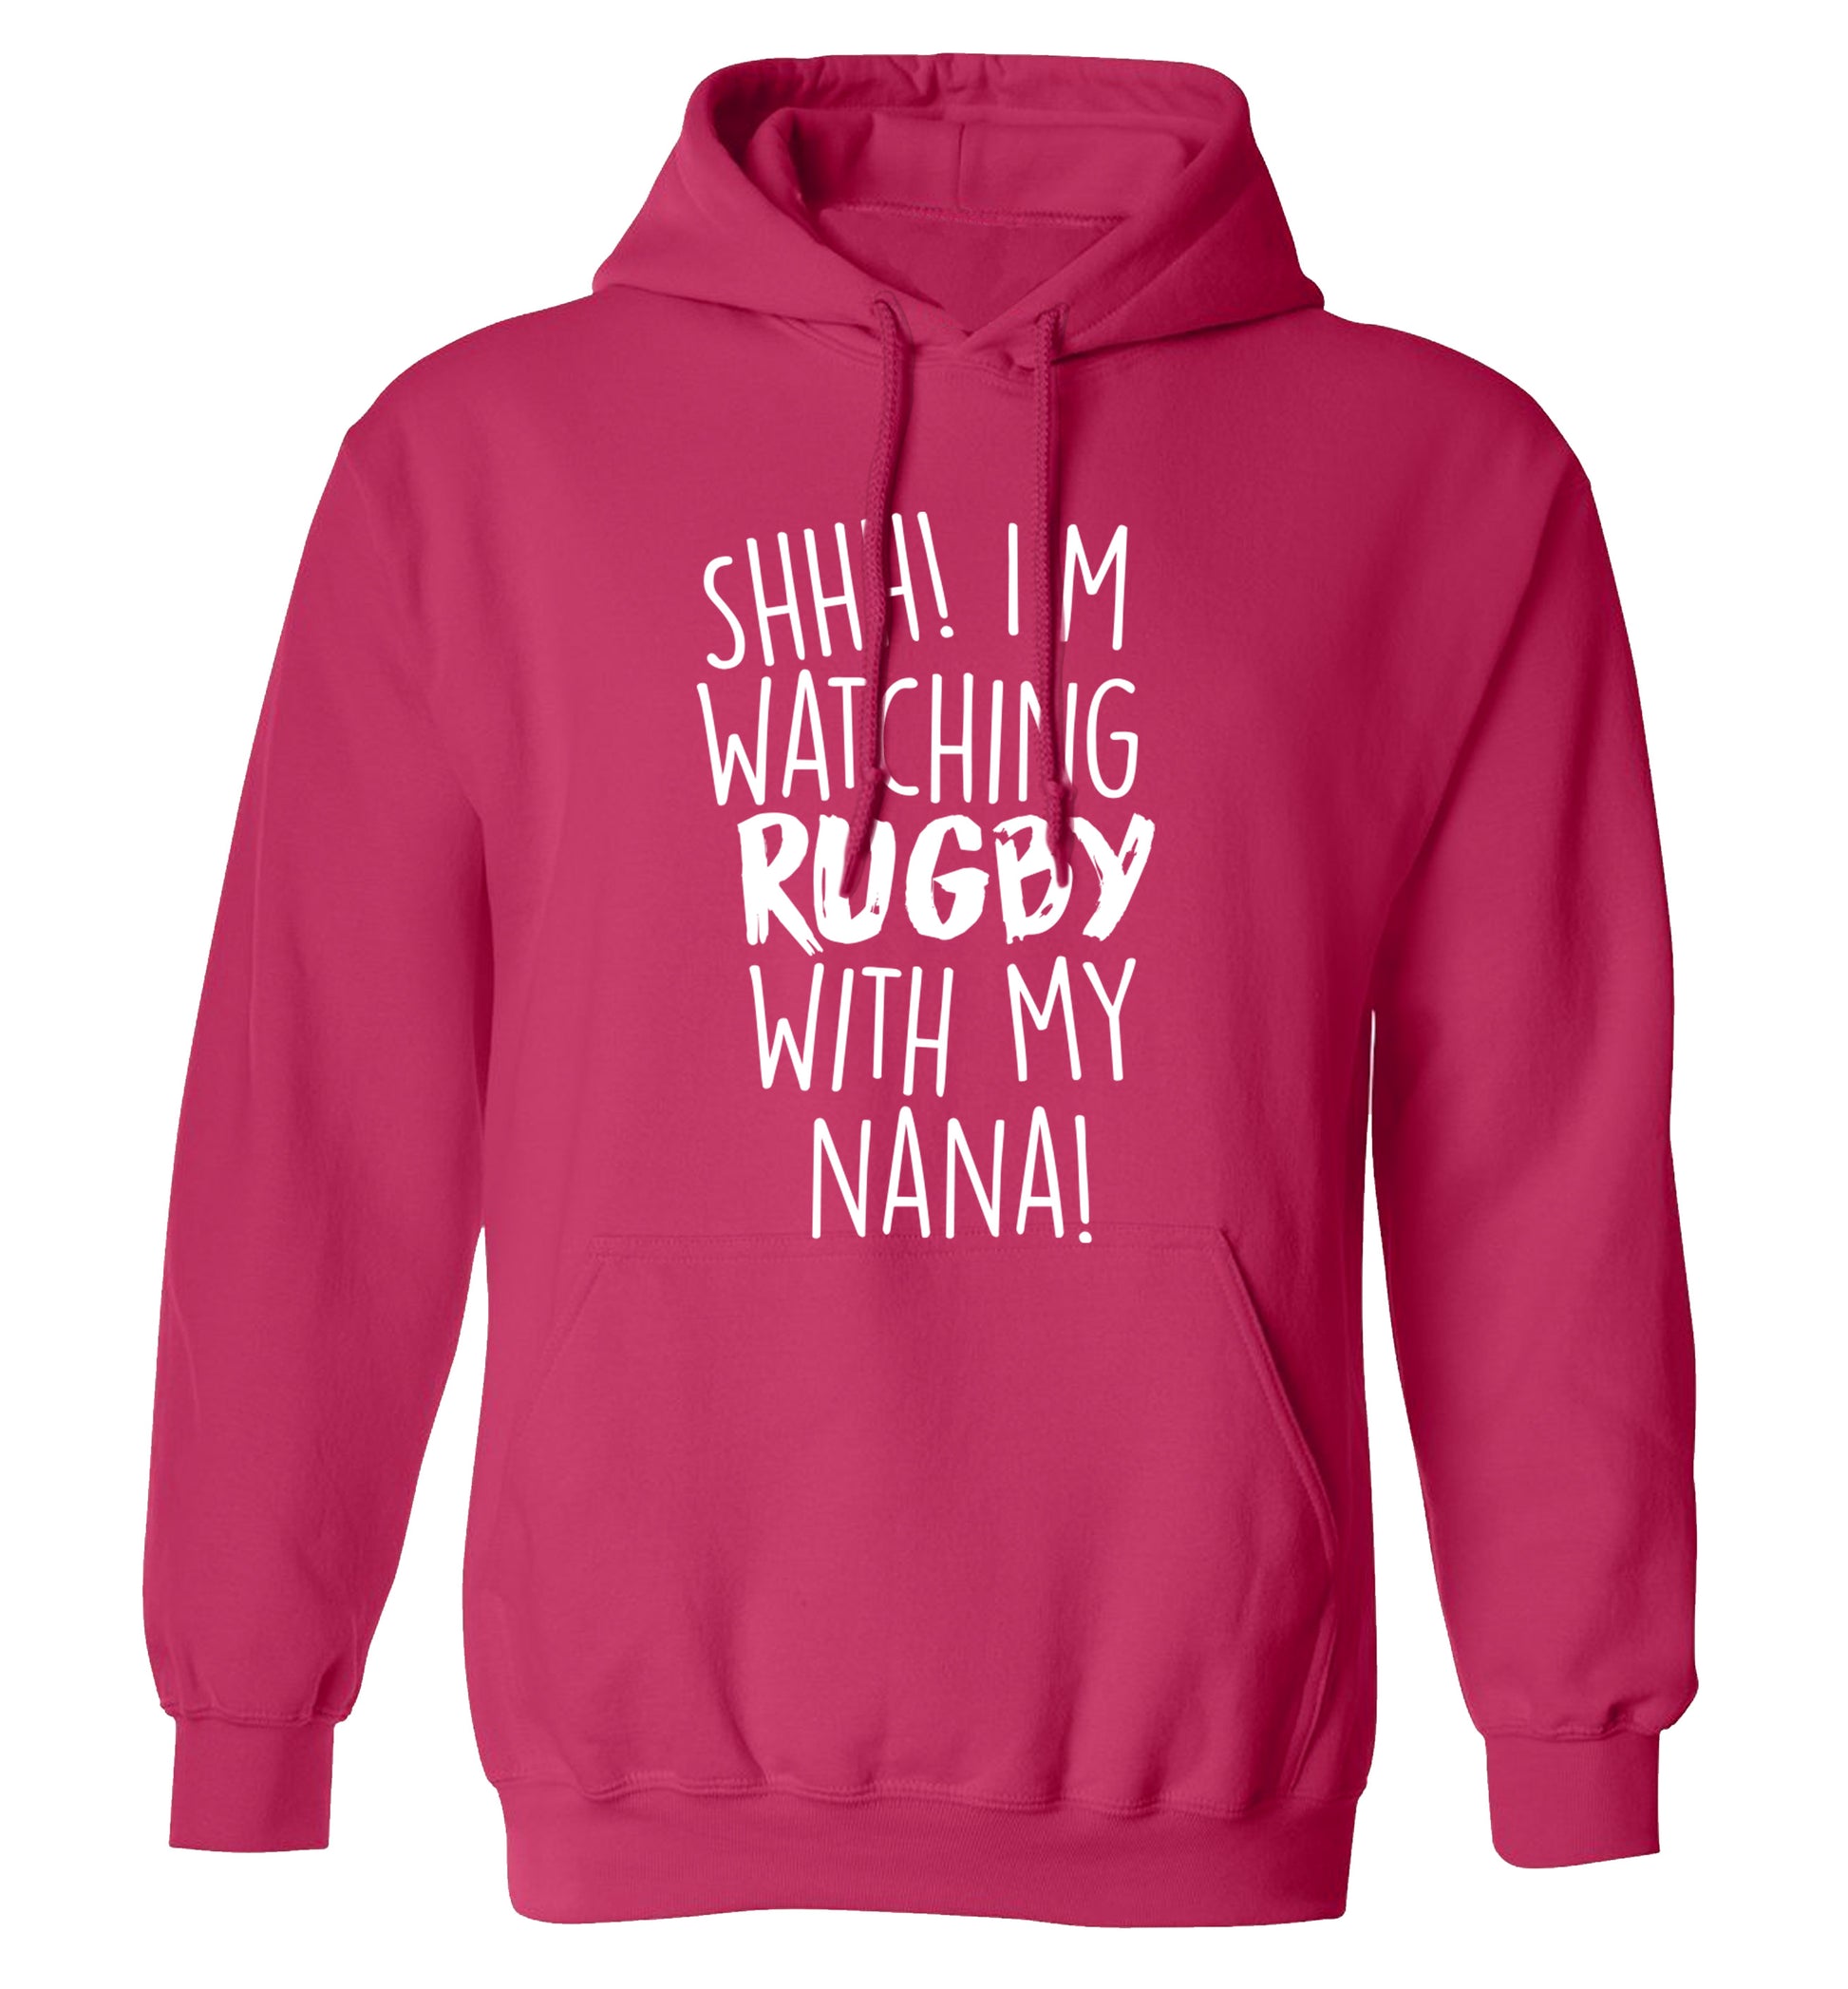 Shh I'm watching rugby with my nana adults unisex pink hoodie 2XL